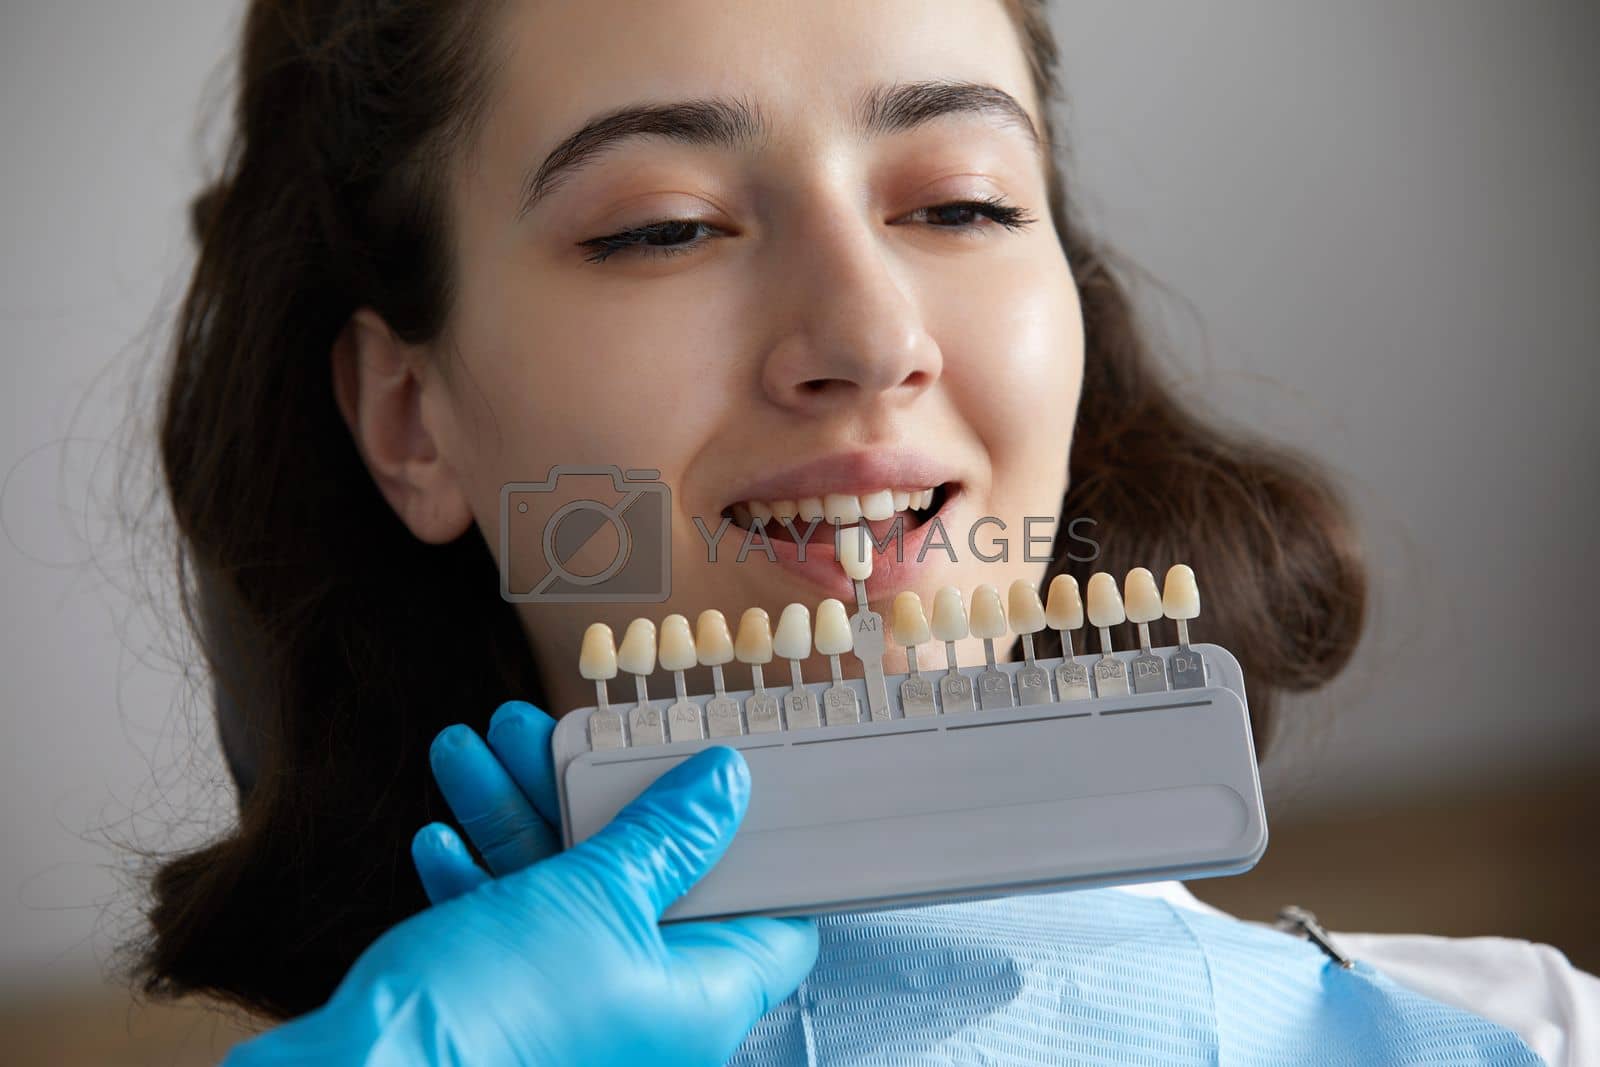 Royalty free image of Dentist choosing color of tooth enamel for patient. Dentist applying sample from tooth enamel scale to caucasian female teeth by Mariakray